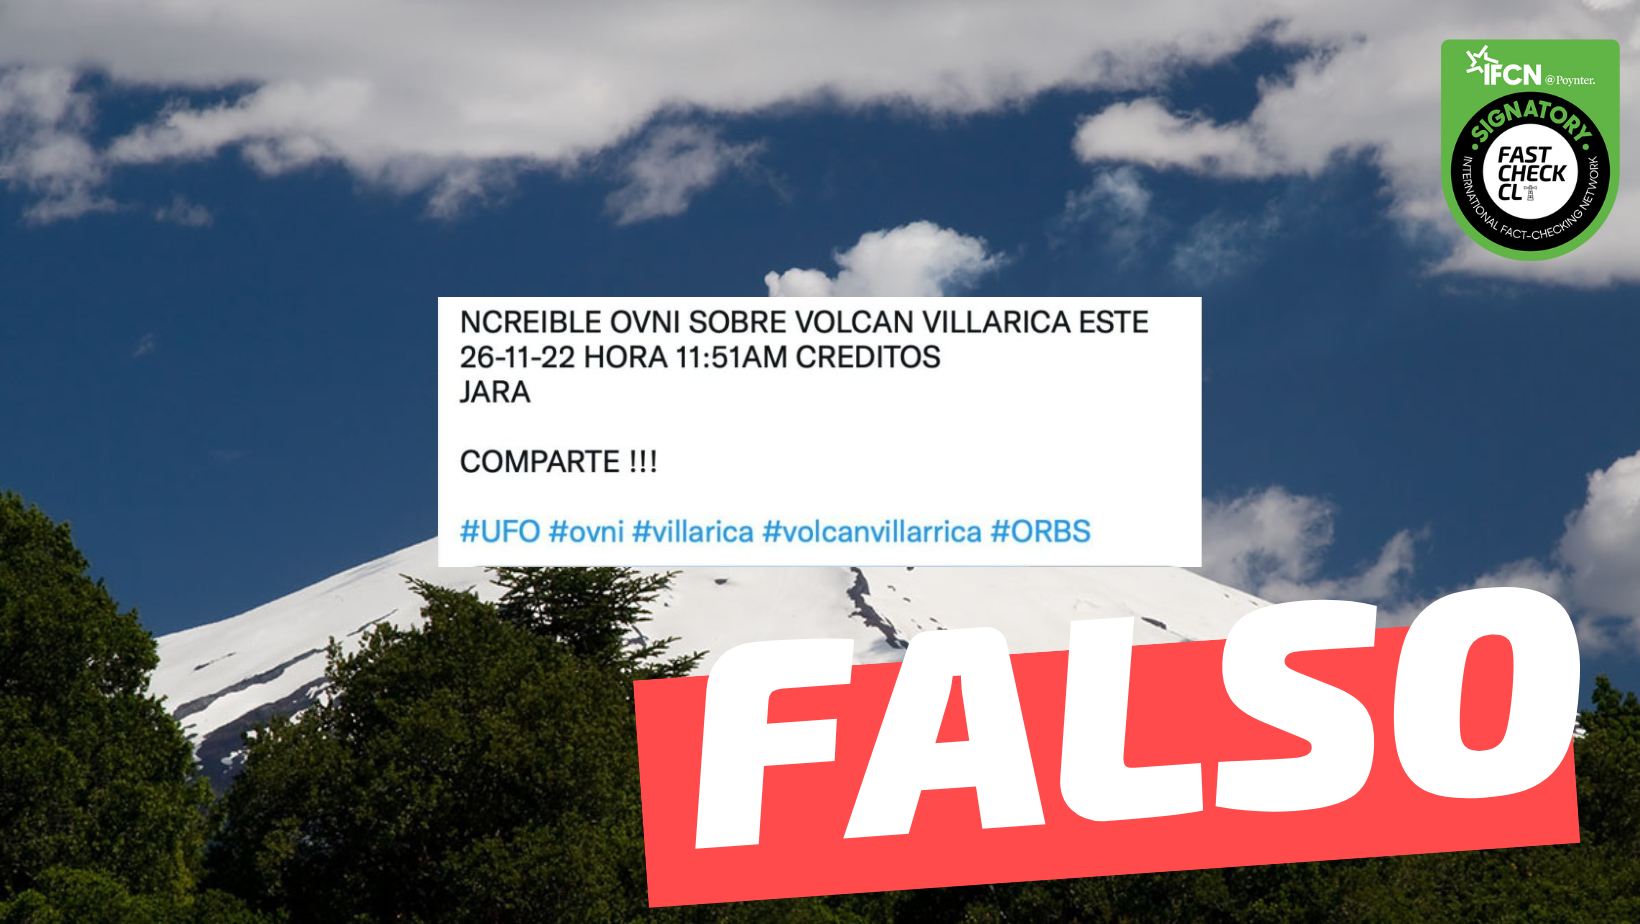 You are currently viewing (Video) “Increíble OVNI sobre volcán Villarrica”: #Falso